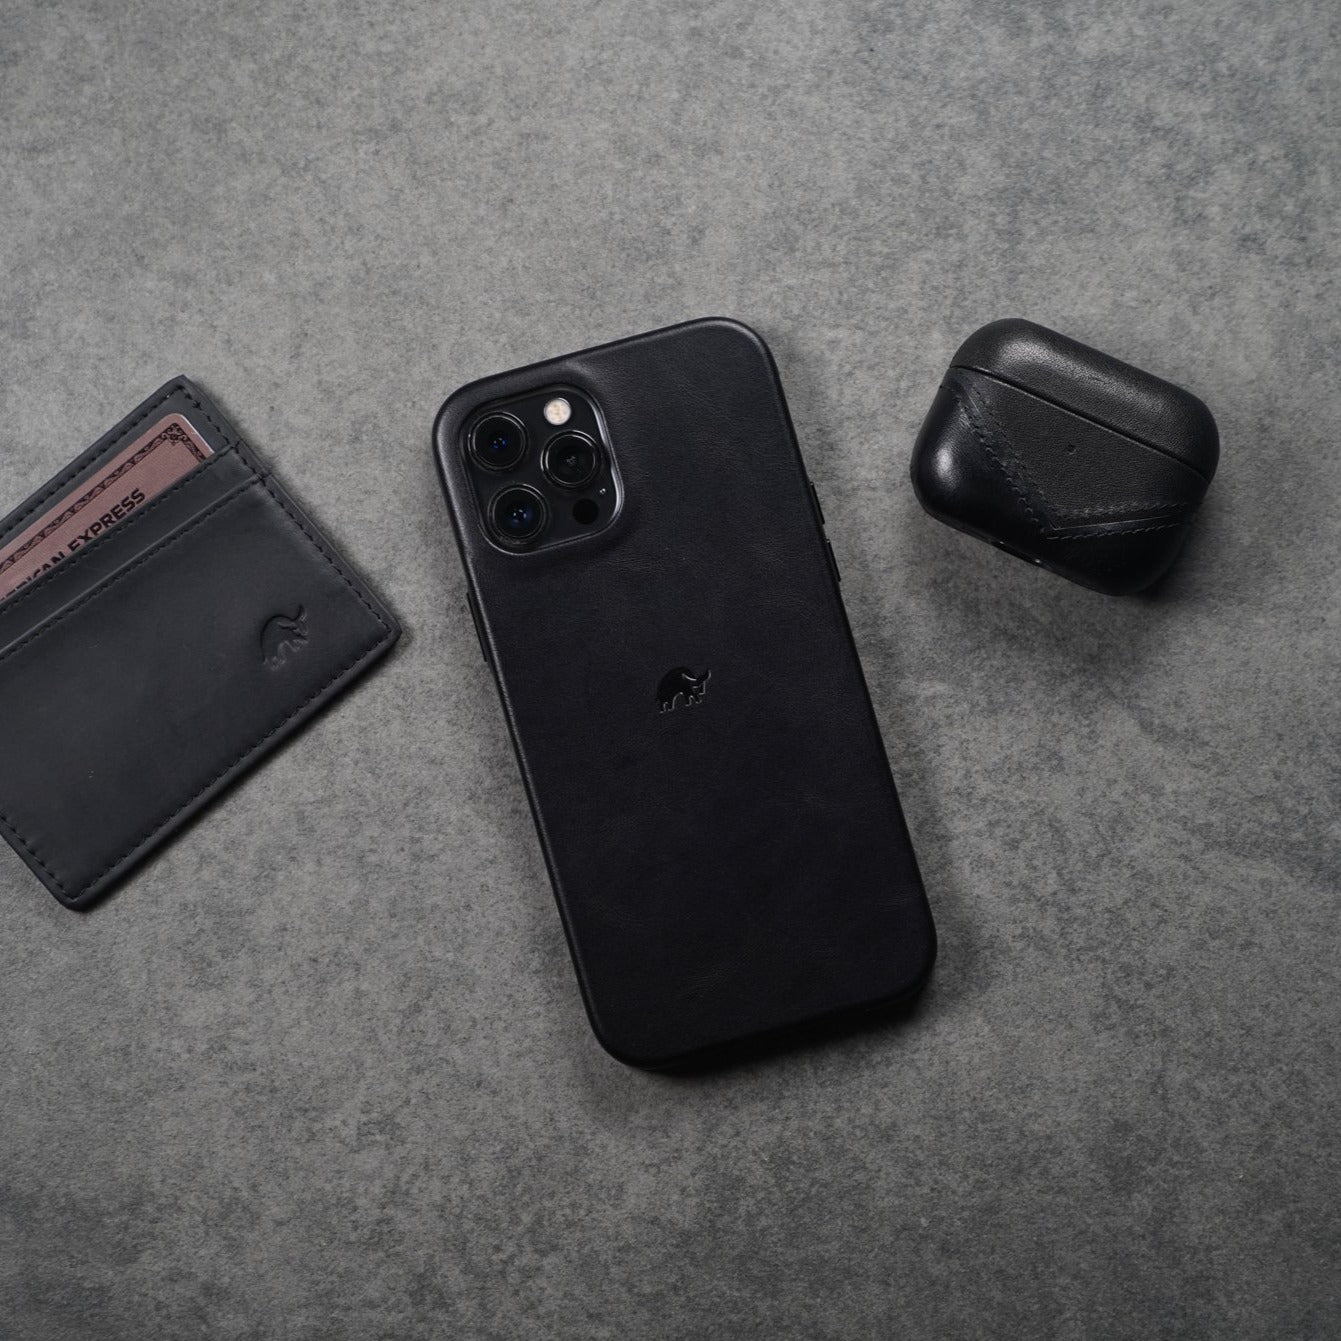 Airpod Leather Case Black